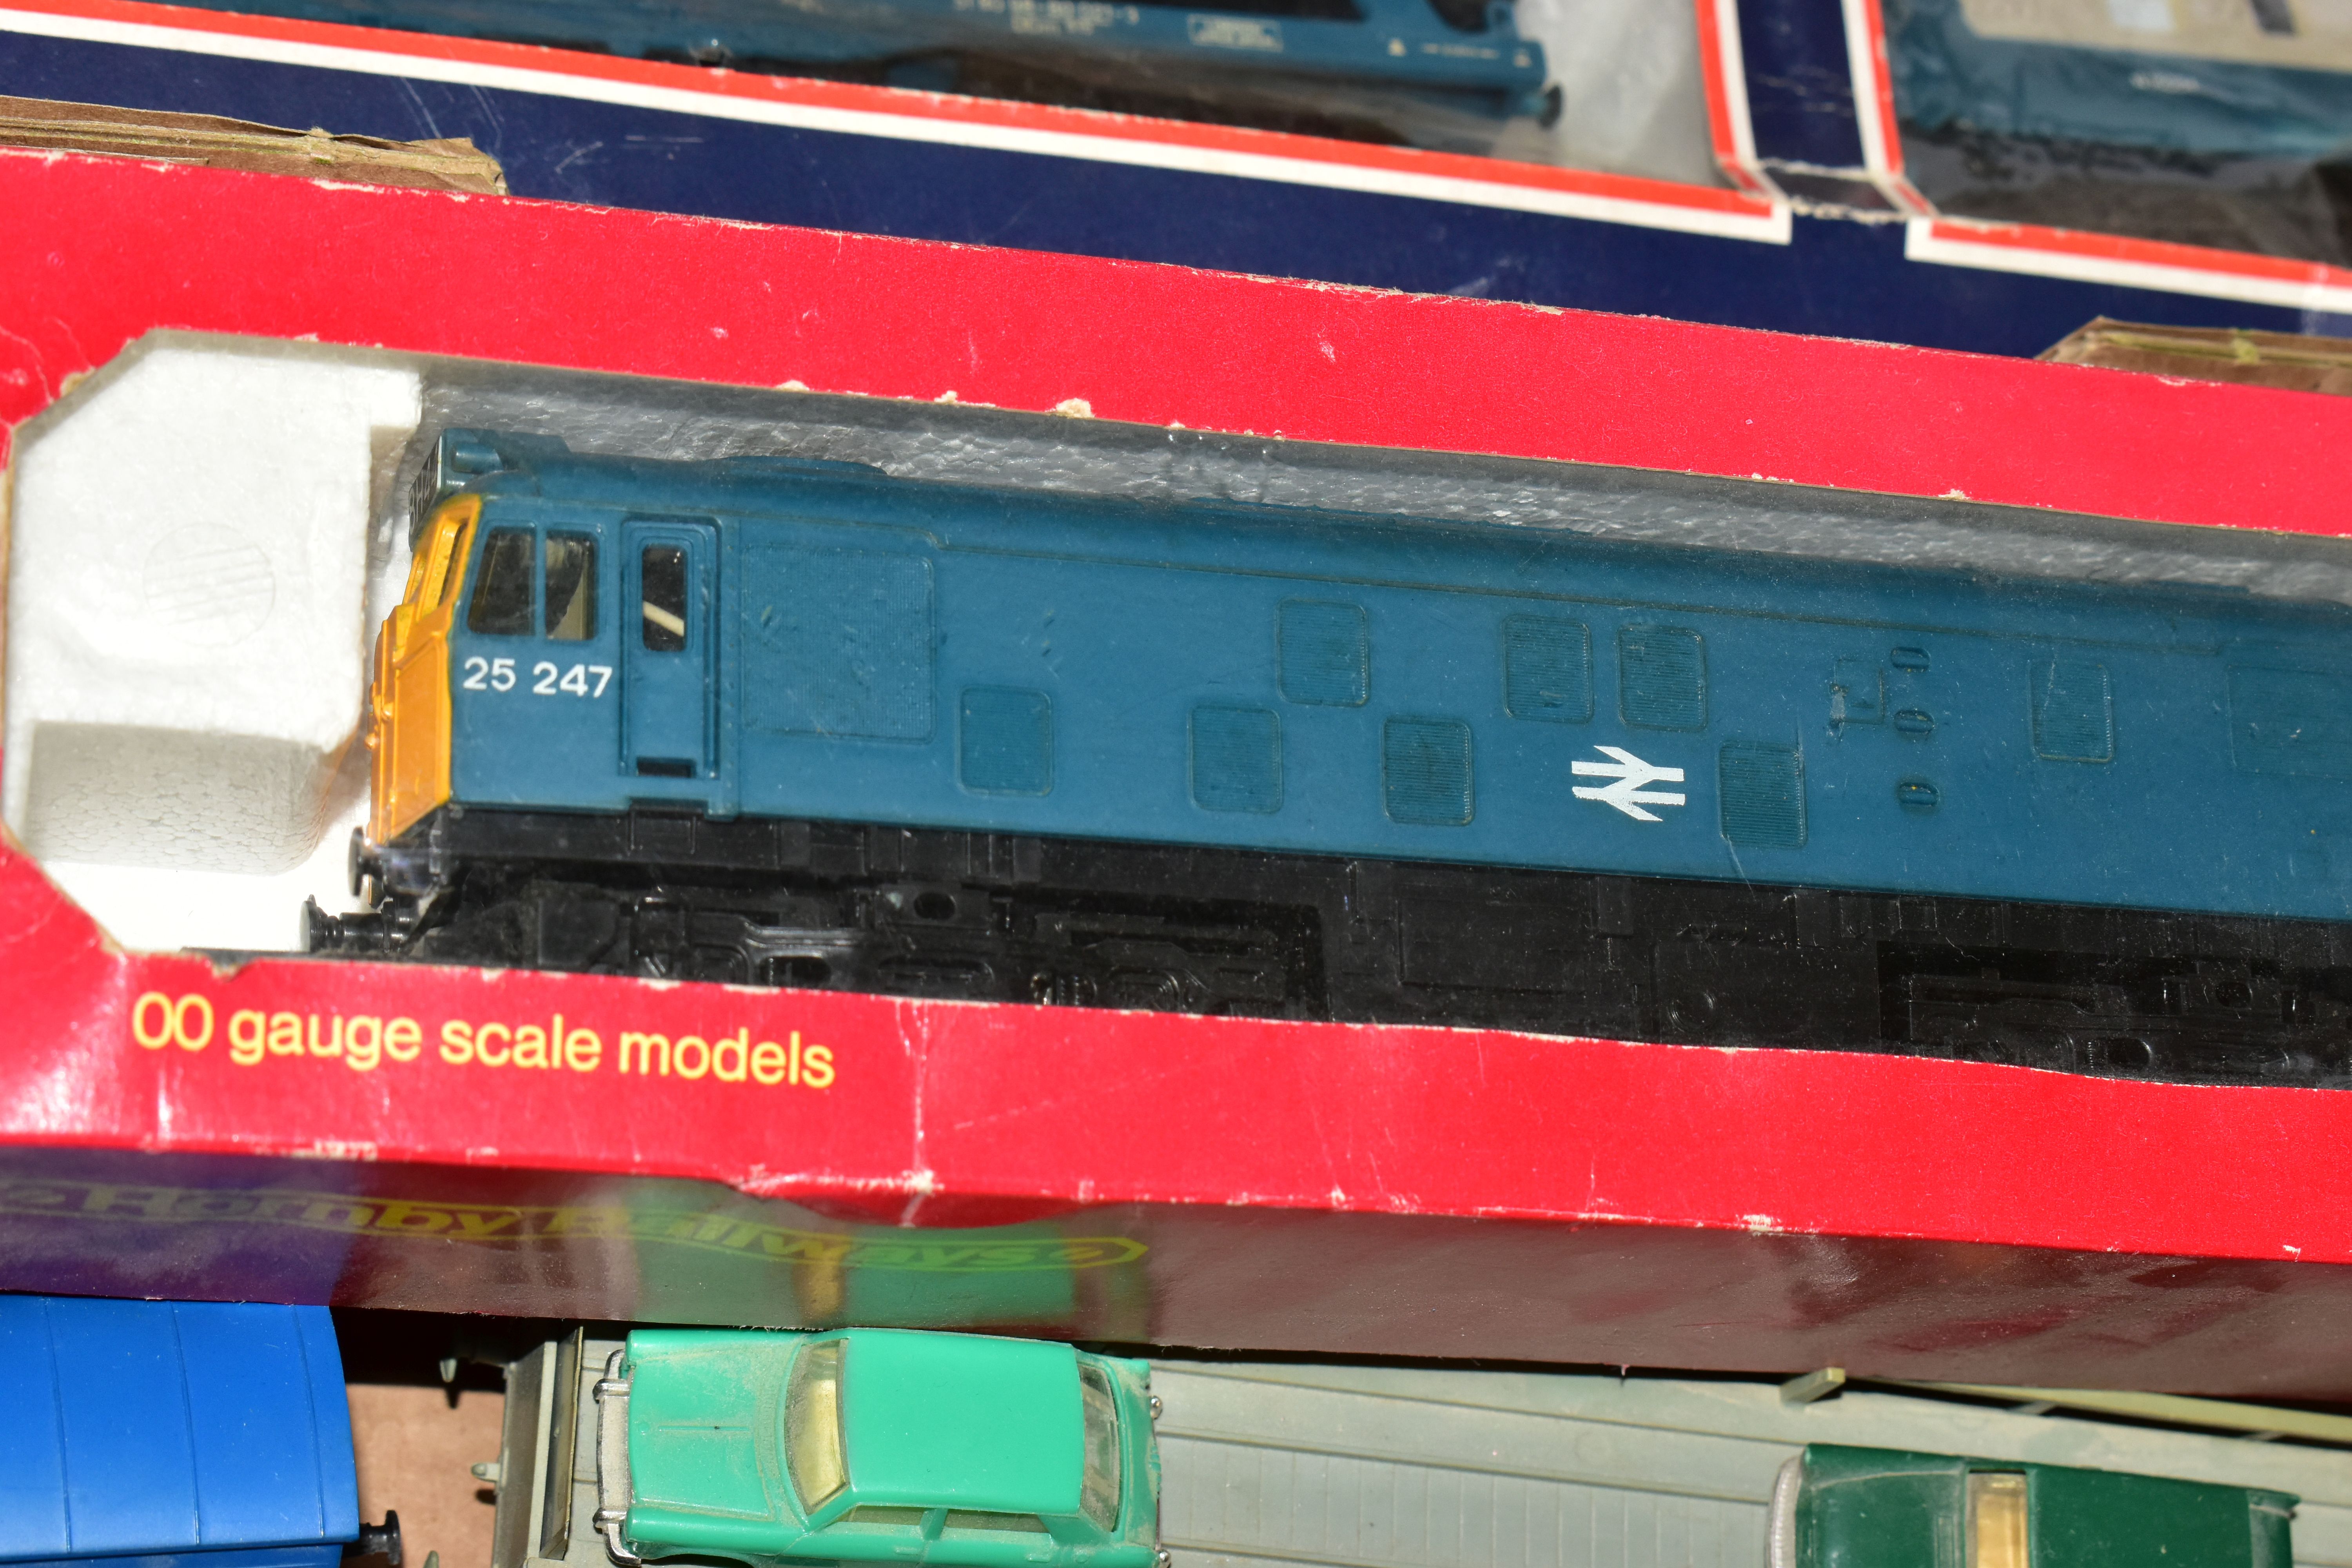 A BOXED LIMA OO GAUGE MOTORAIL EXPRESS TRAIN SET, No.102164 AW, comprising class 33 locomotive No. - Image 10 of 12